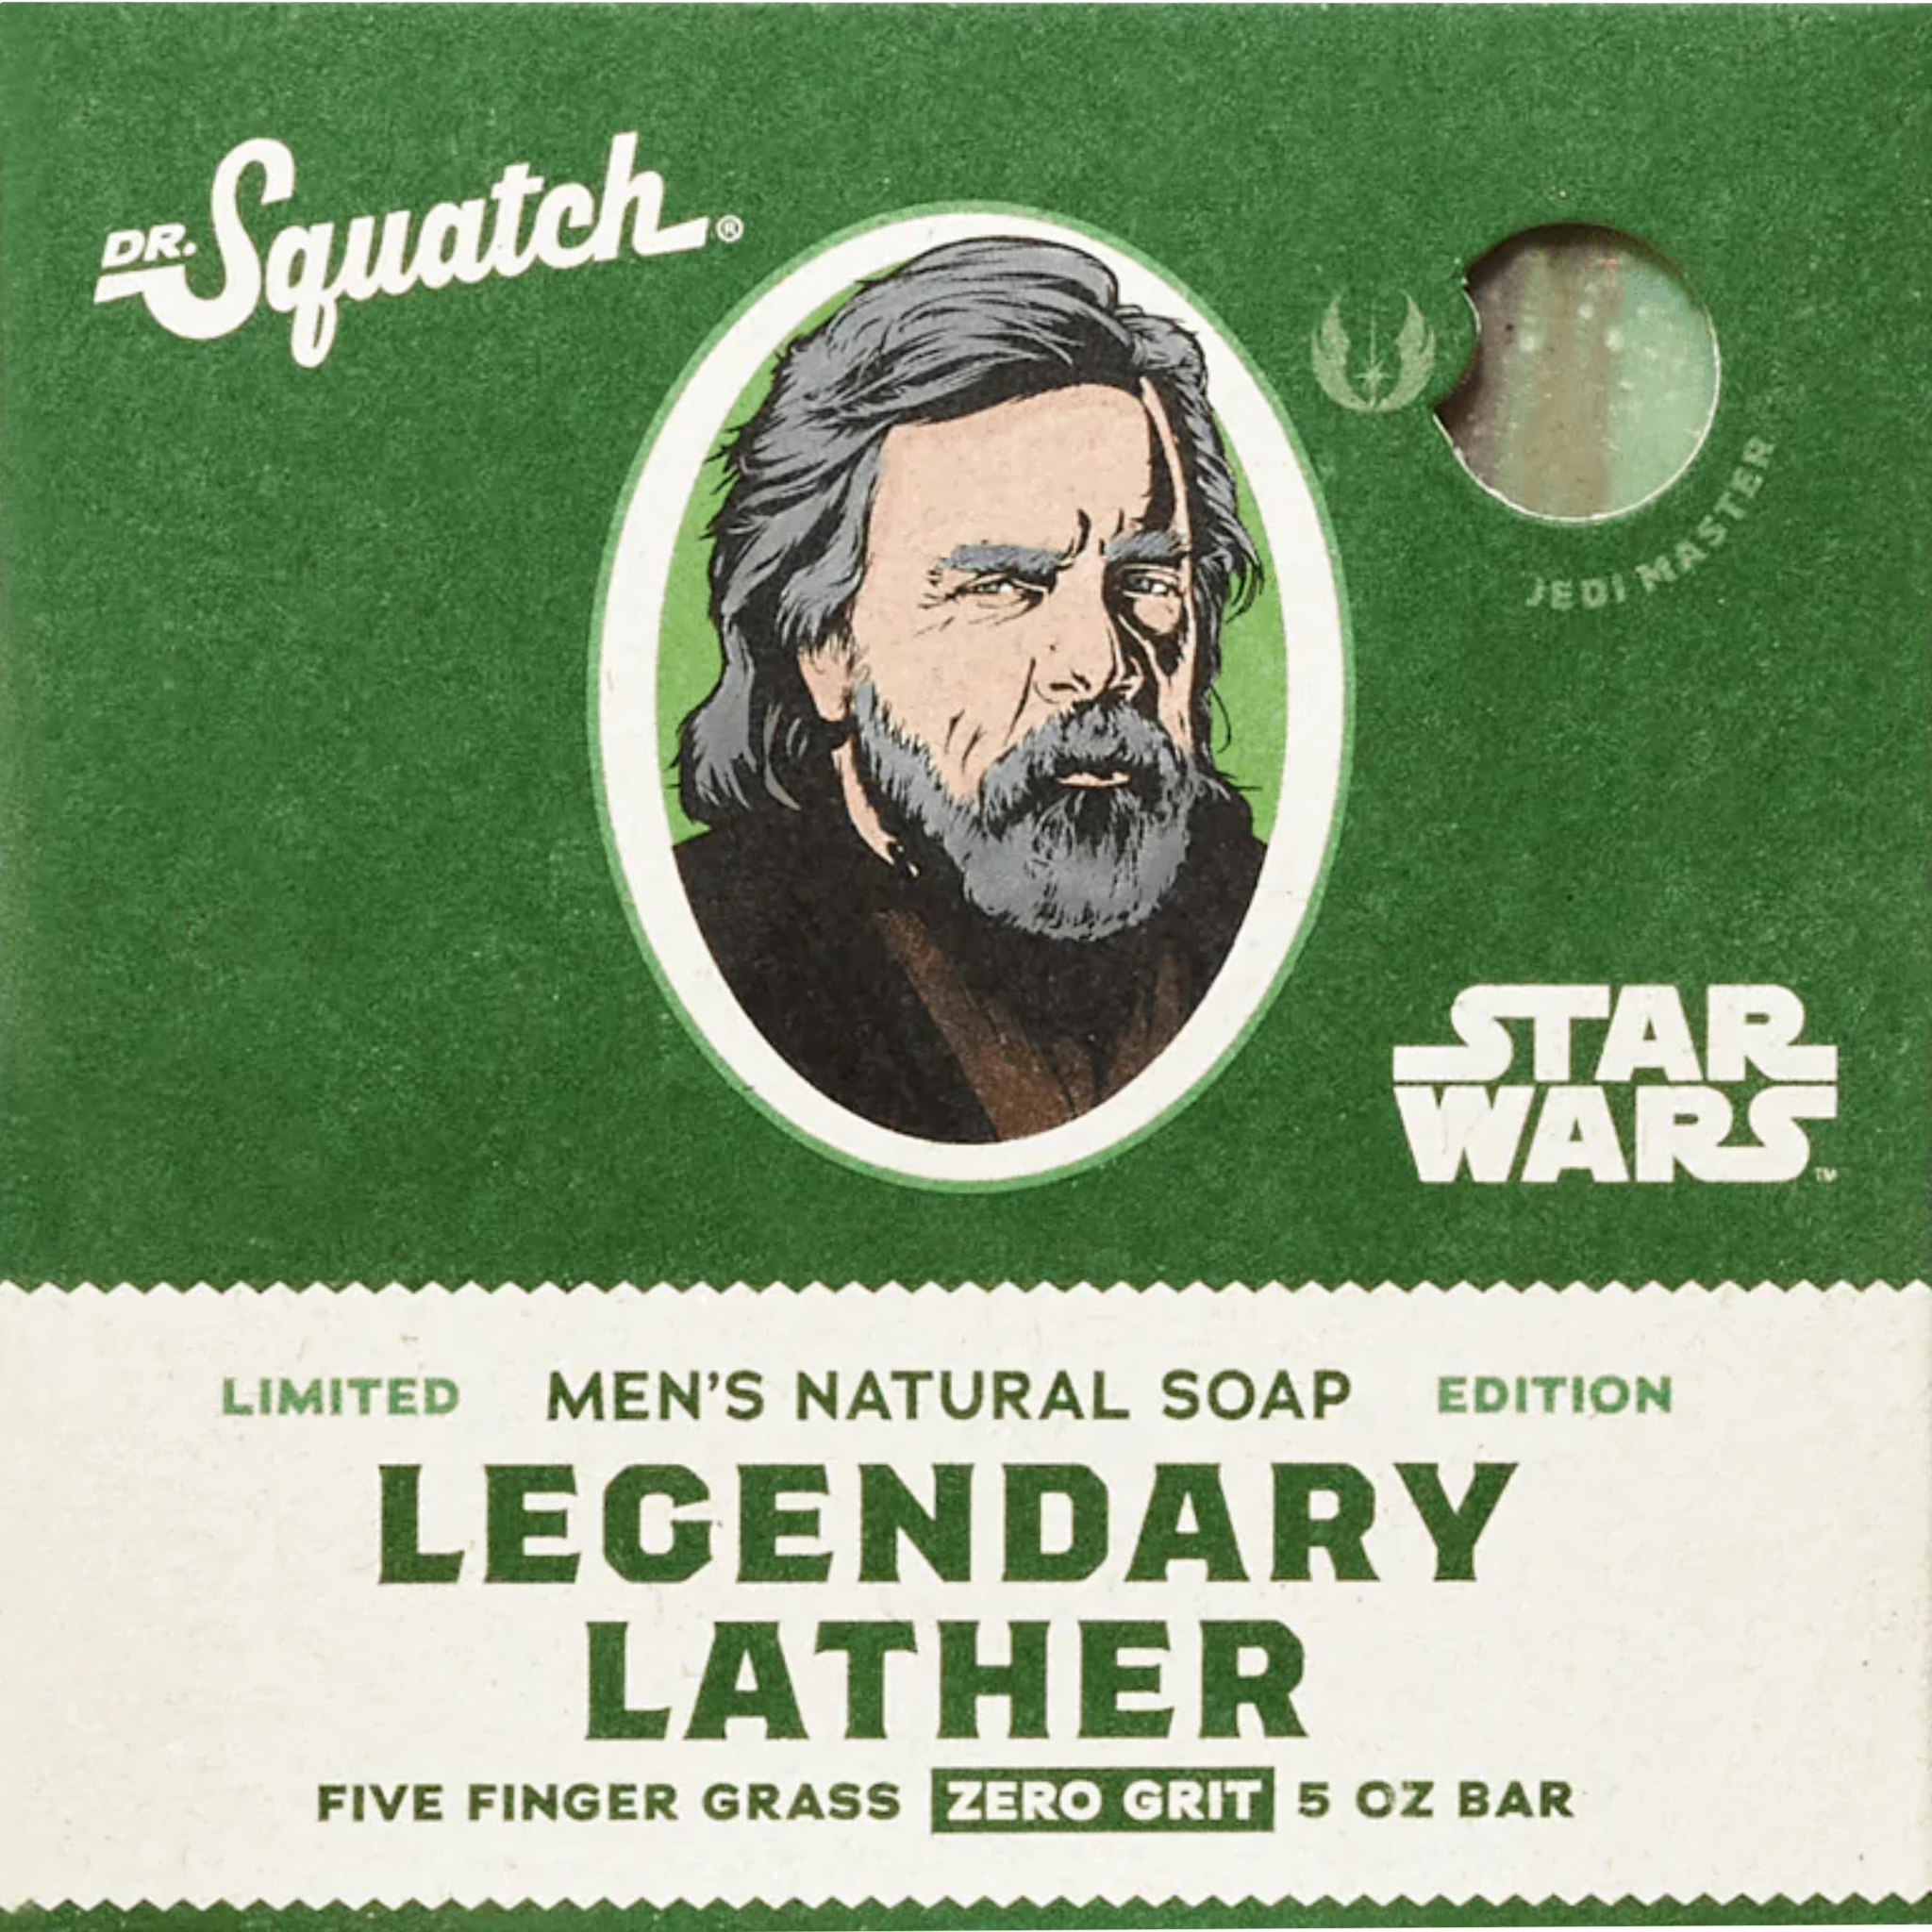 Dr. Squatch Star Wars Limited Edition: Unique Bar Soaps Inspired